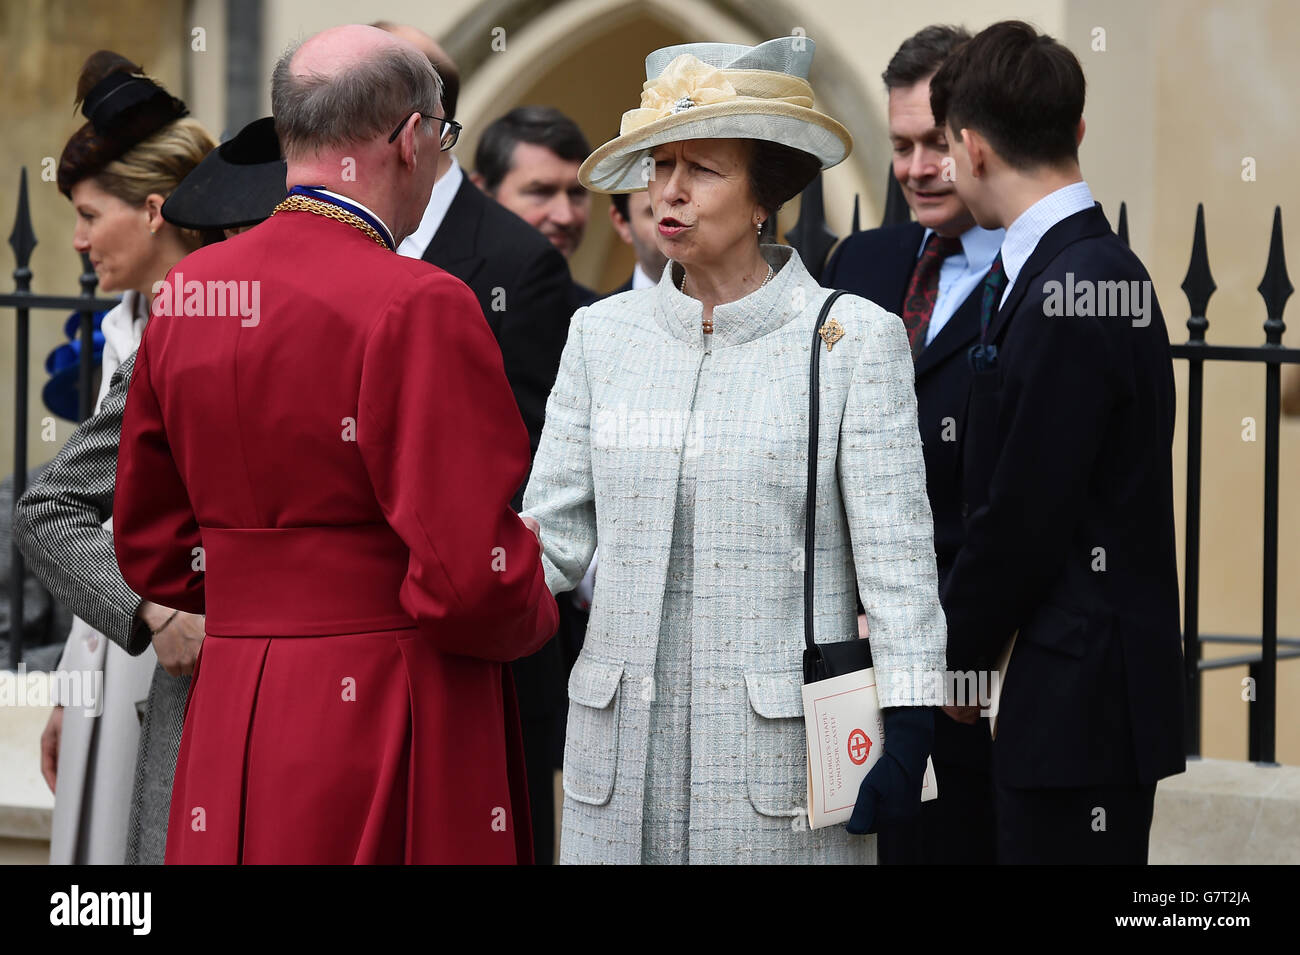 Royals at Easter Sunday service - Windsor Stock Photo - Alamy